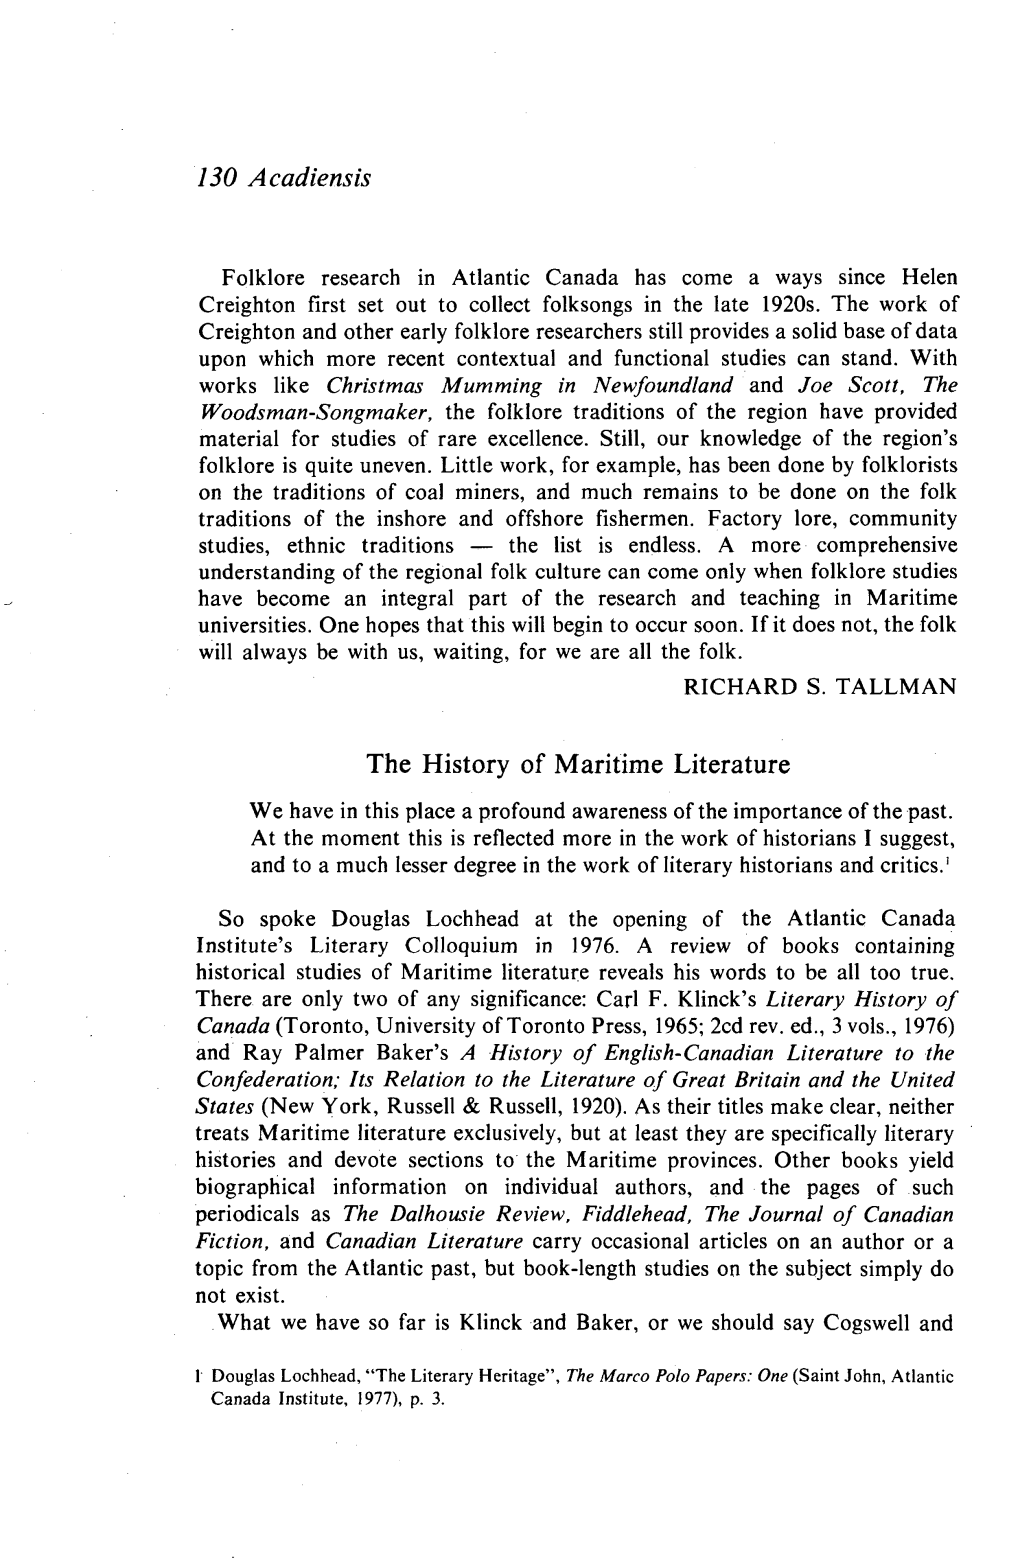 130 Acadiensis the History of Maritime Literature